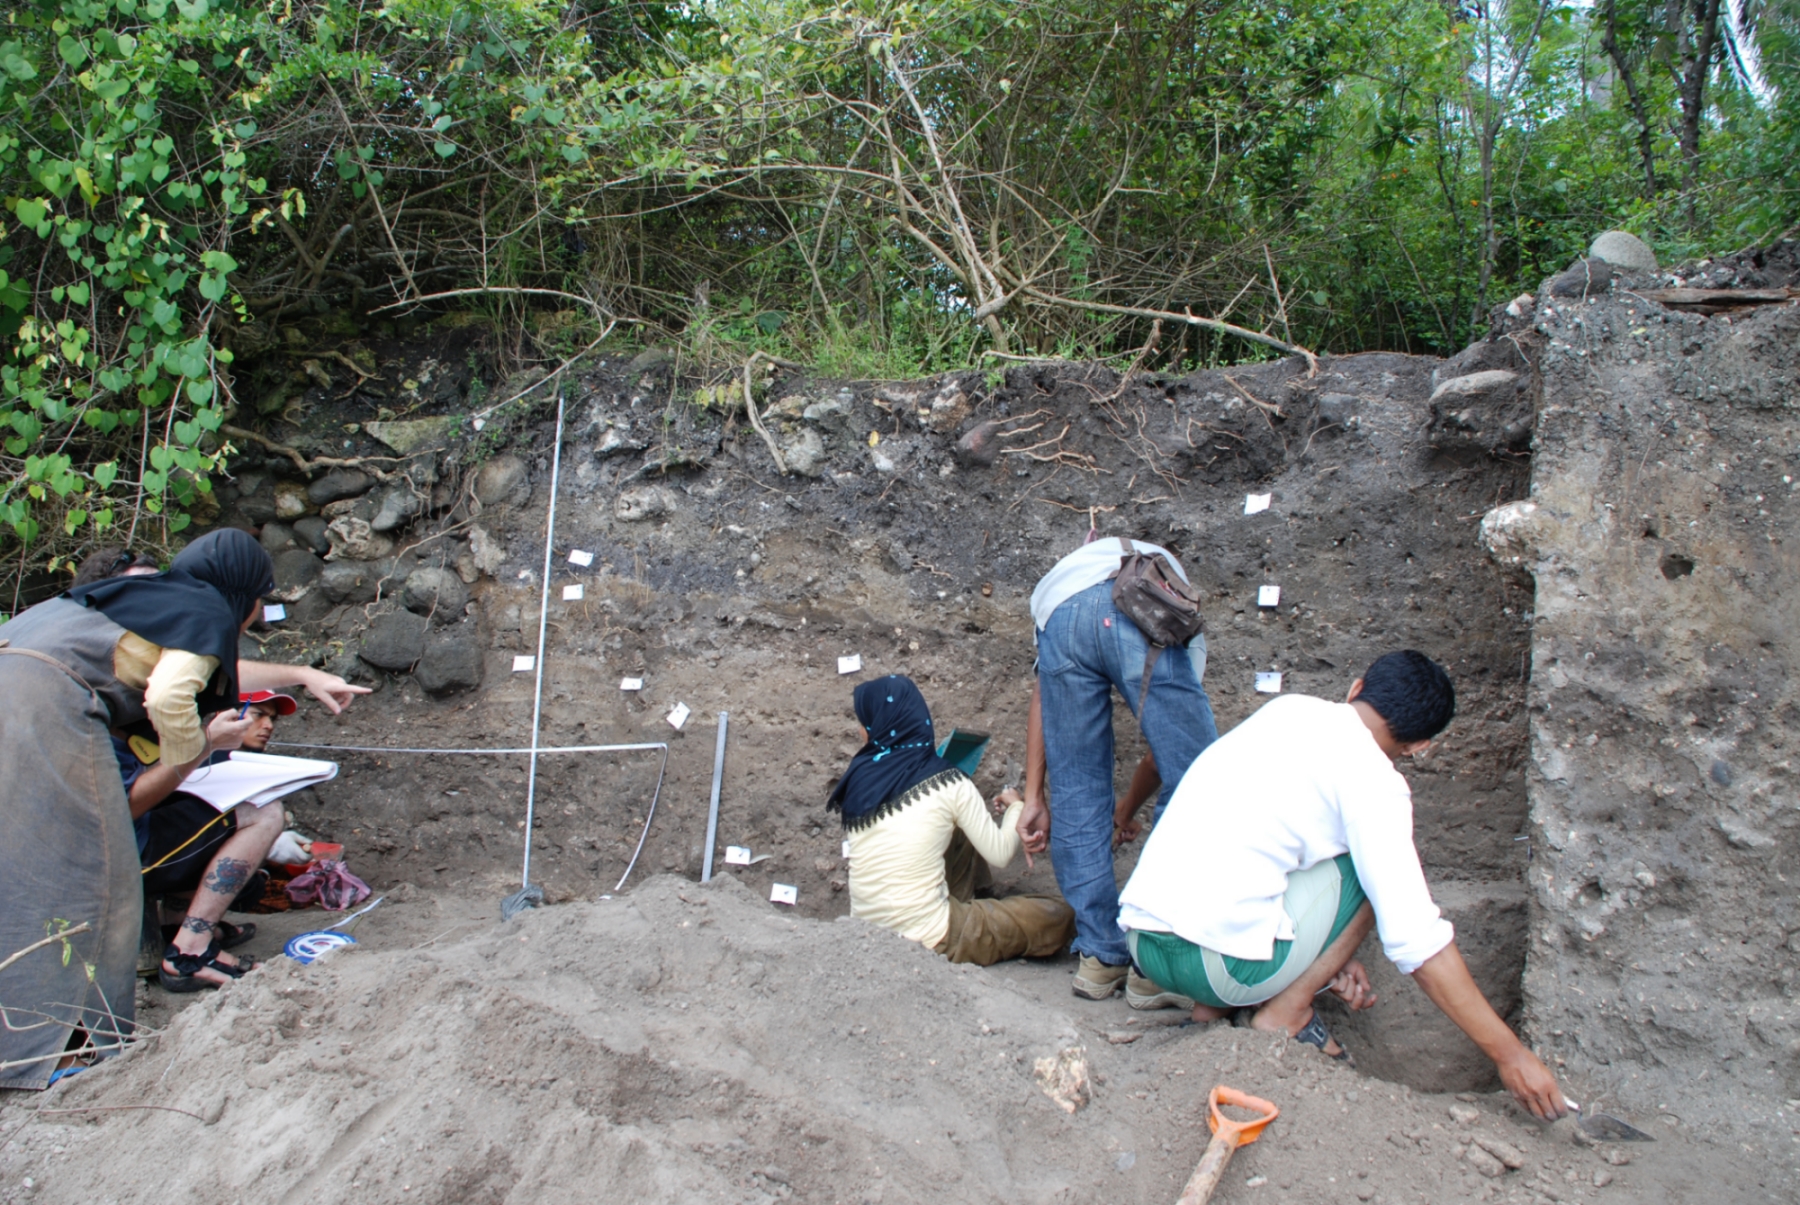 Researchers from the Aceh Heritage Community cutting back the Lamreh beach cliffs in 2008 (Source: Patrick Daly/Earth Observatory of Singapore)